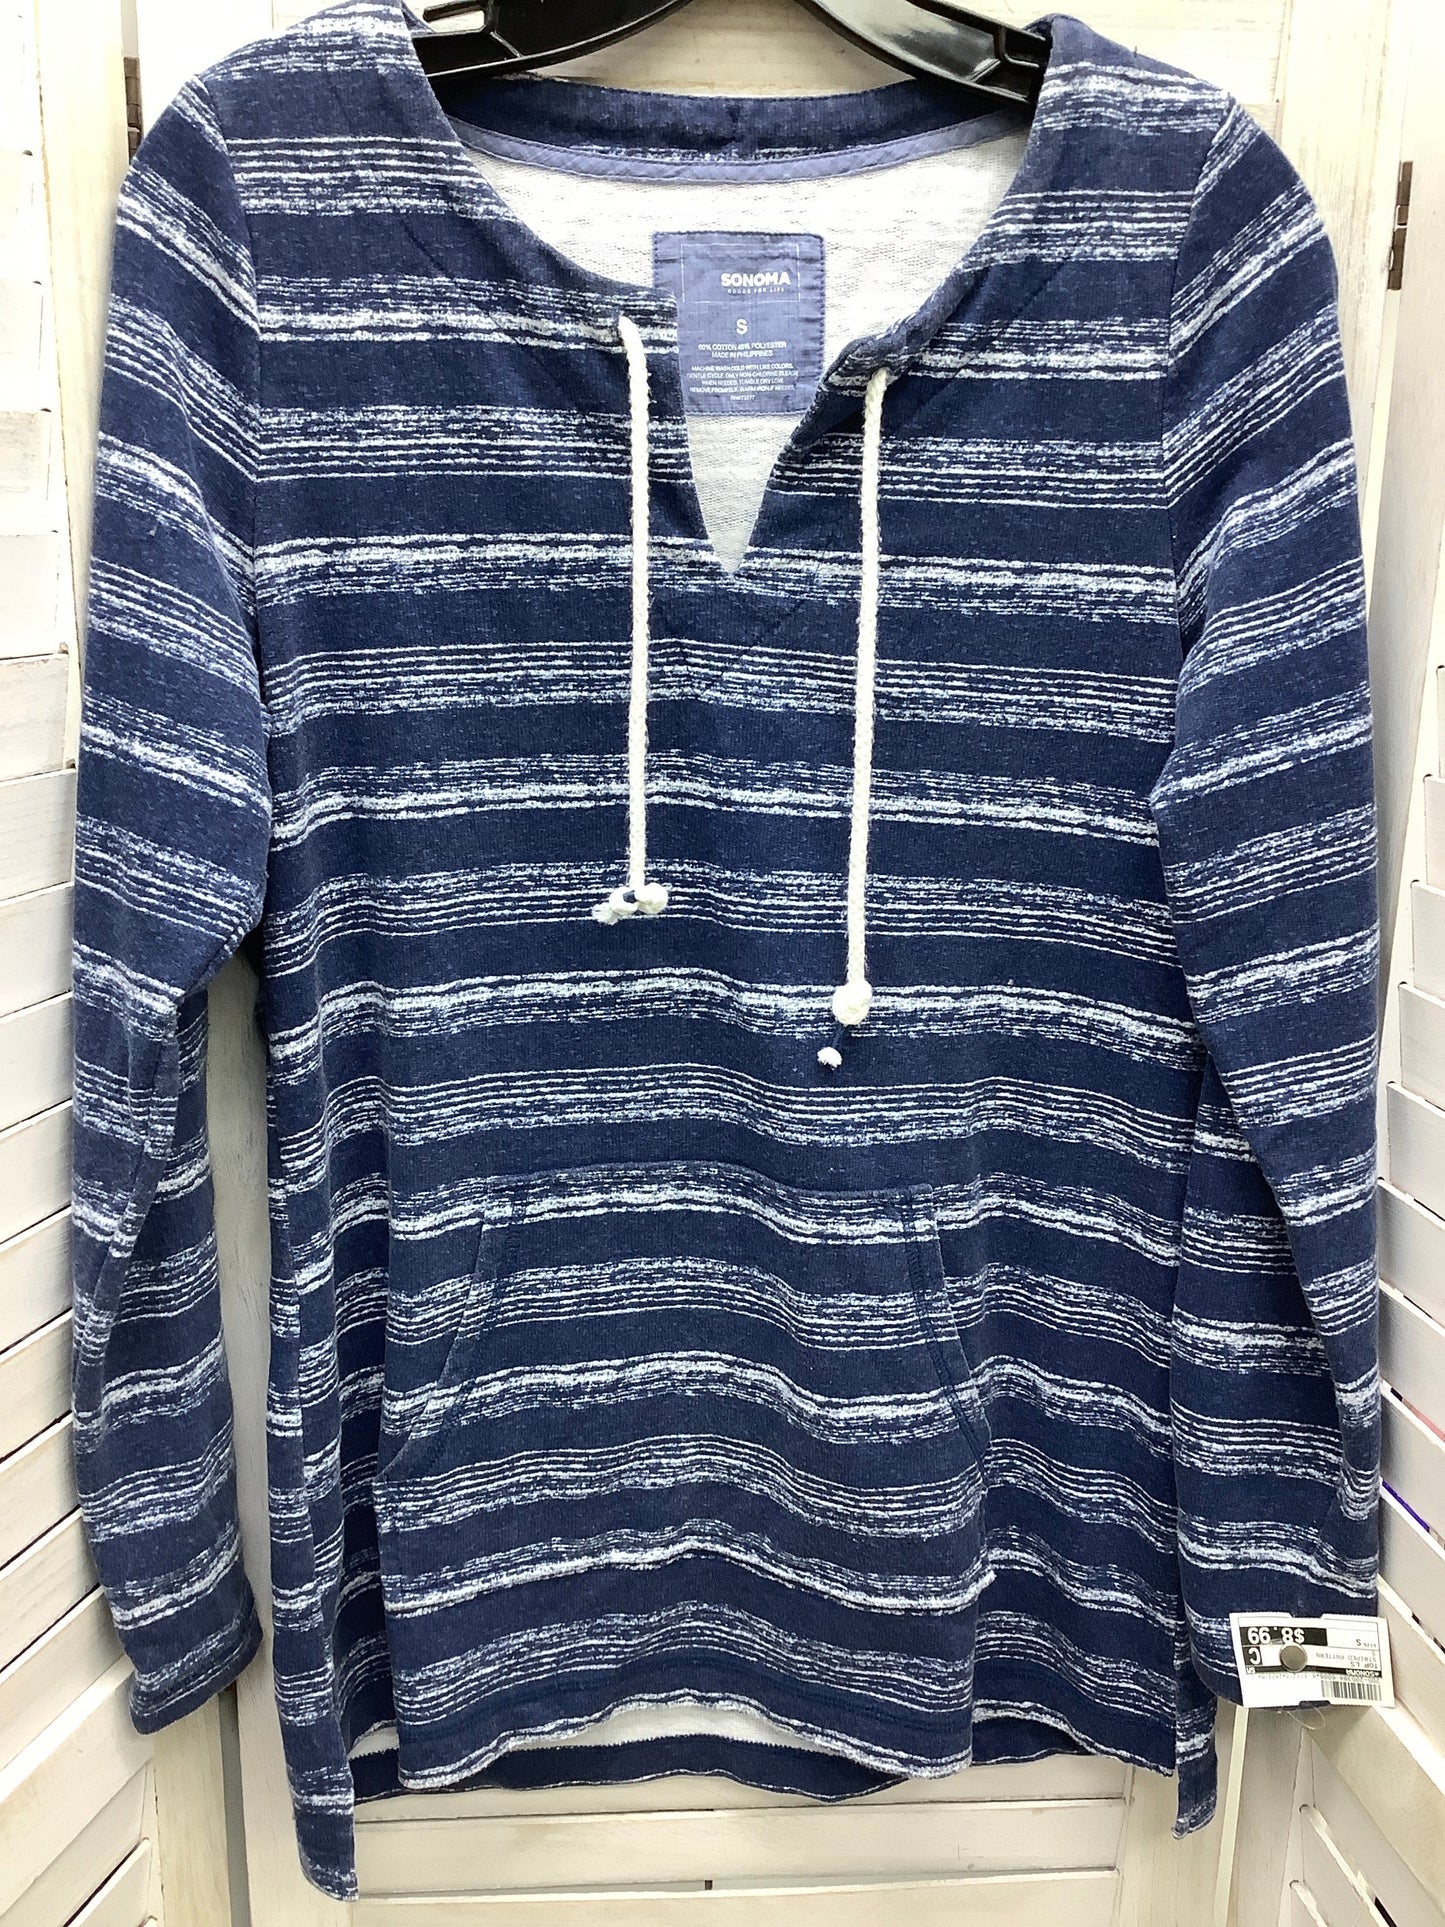 Striped Pattern Top Long Sleeve Sonoma, Size S